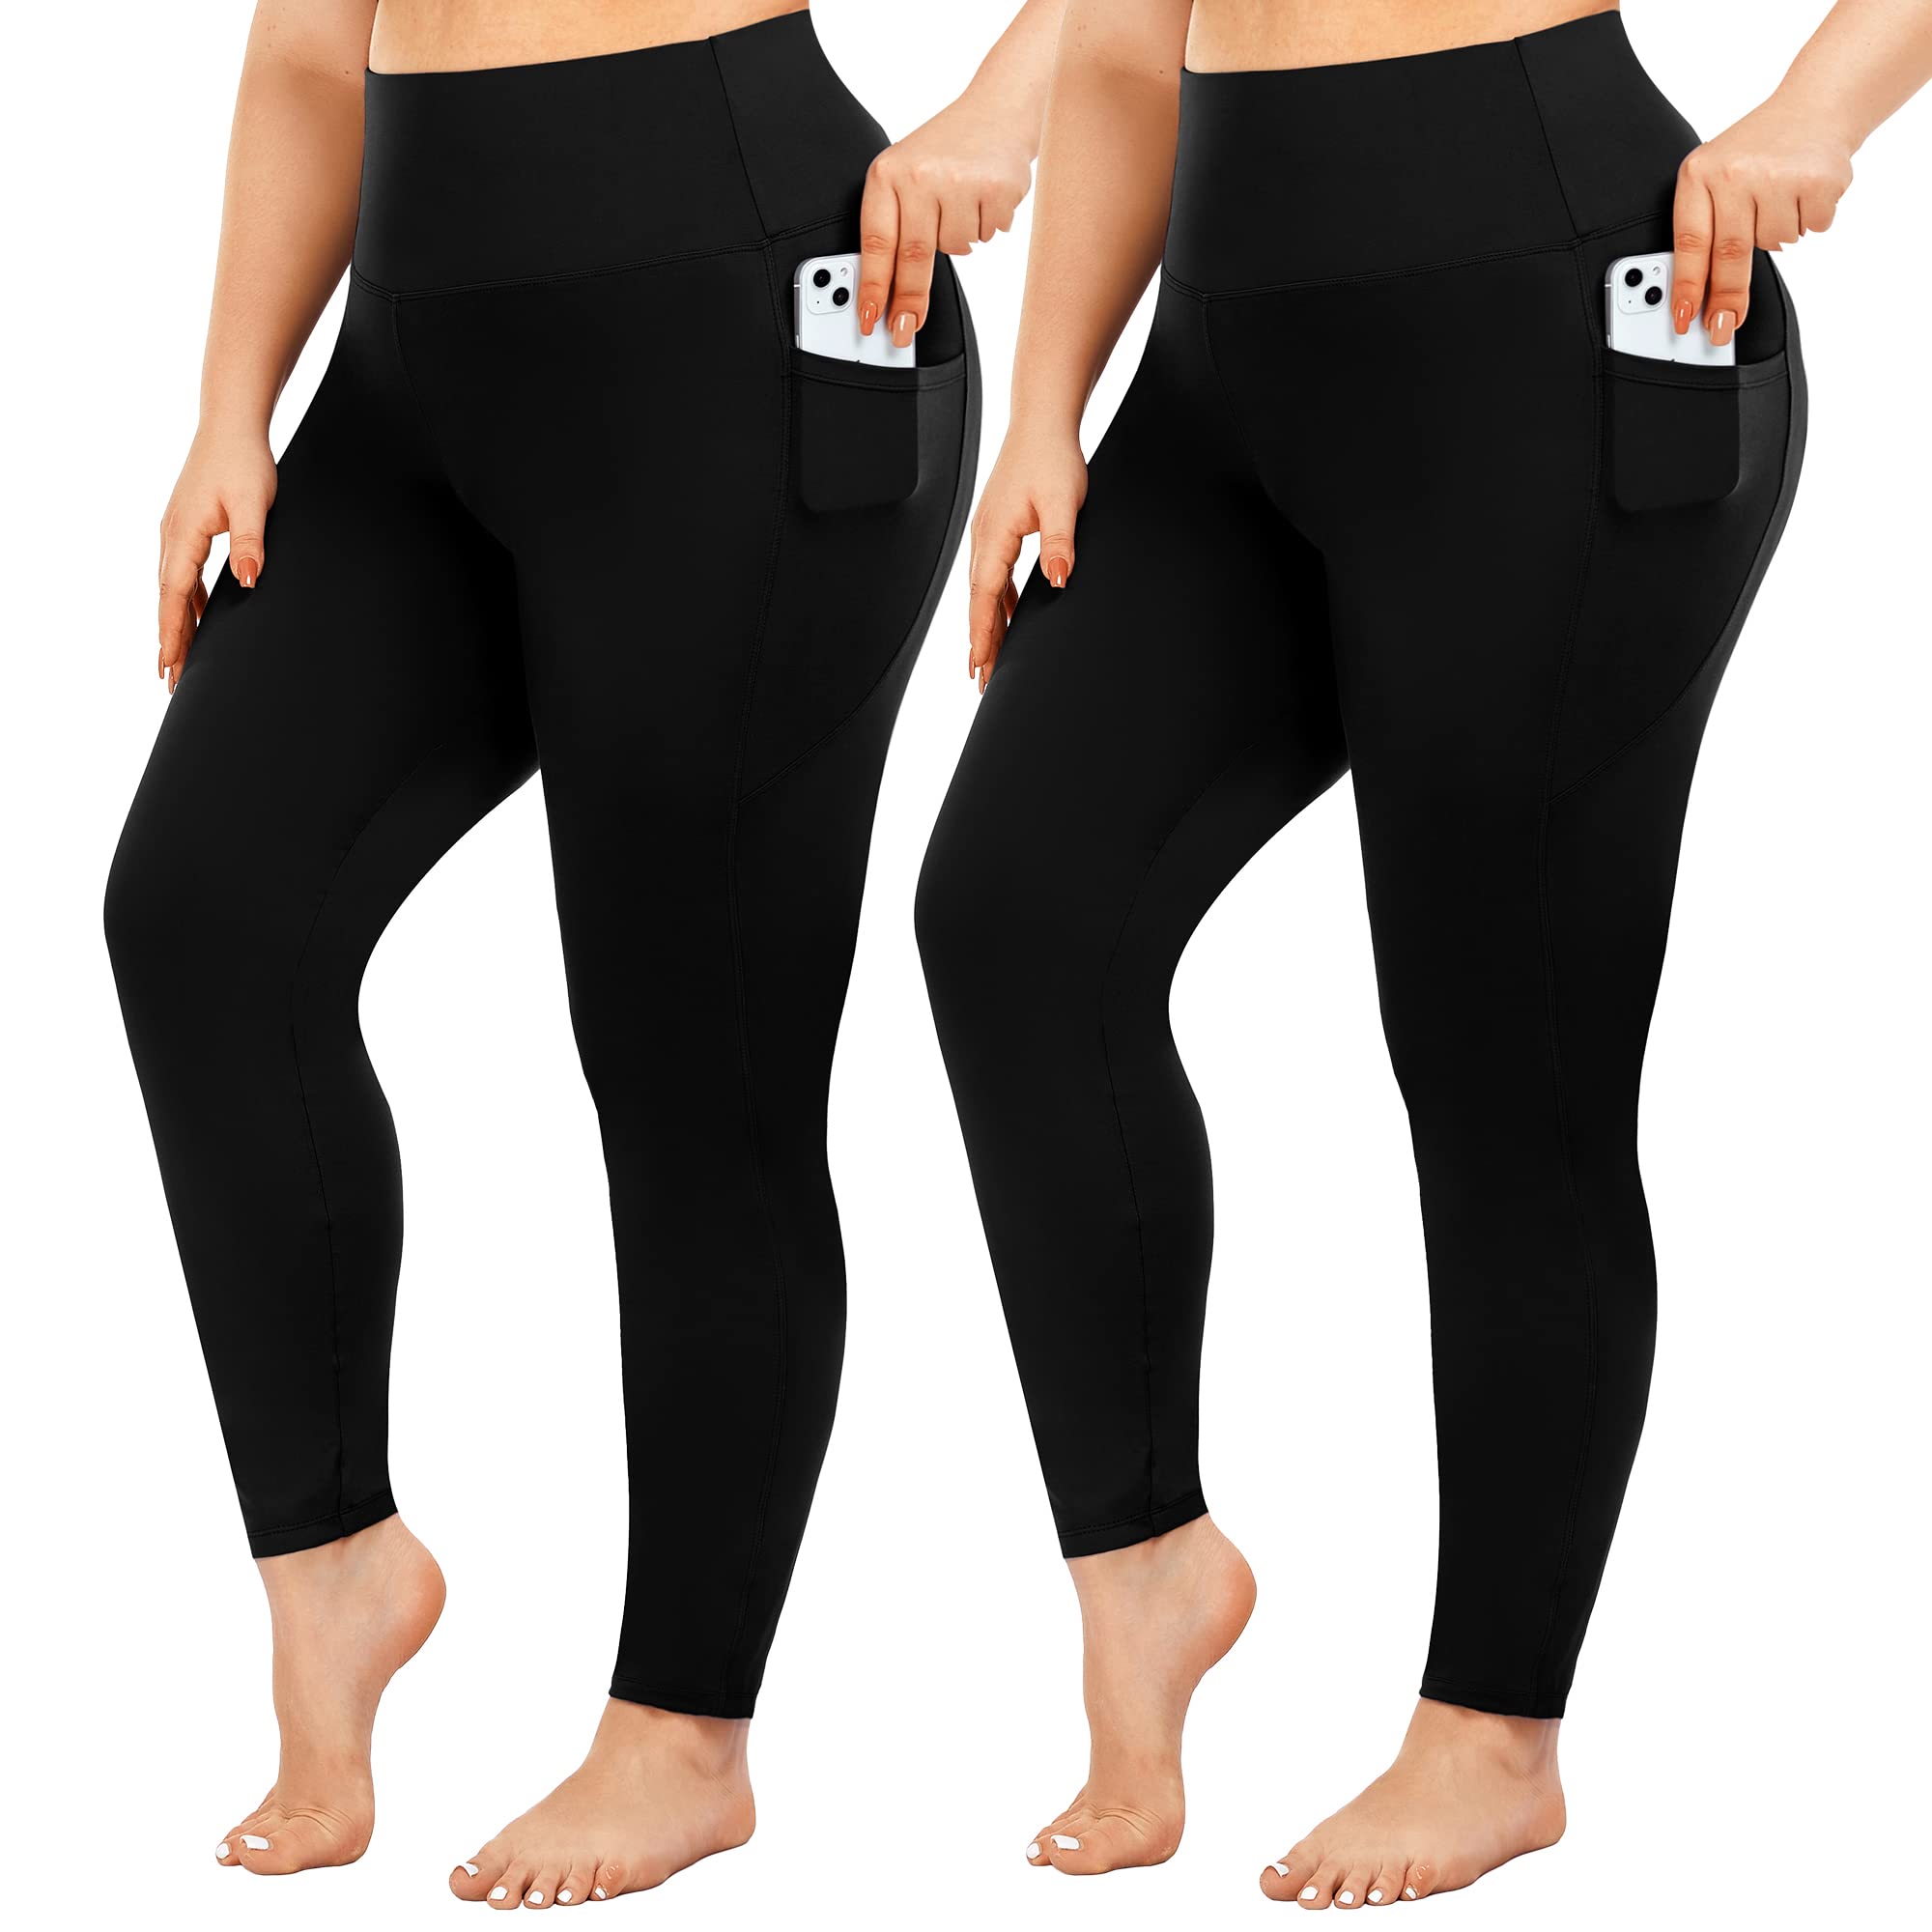 Women's Yoga Leggings Tummy Control Workout Running Pants with Pocket Pack  of 1